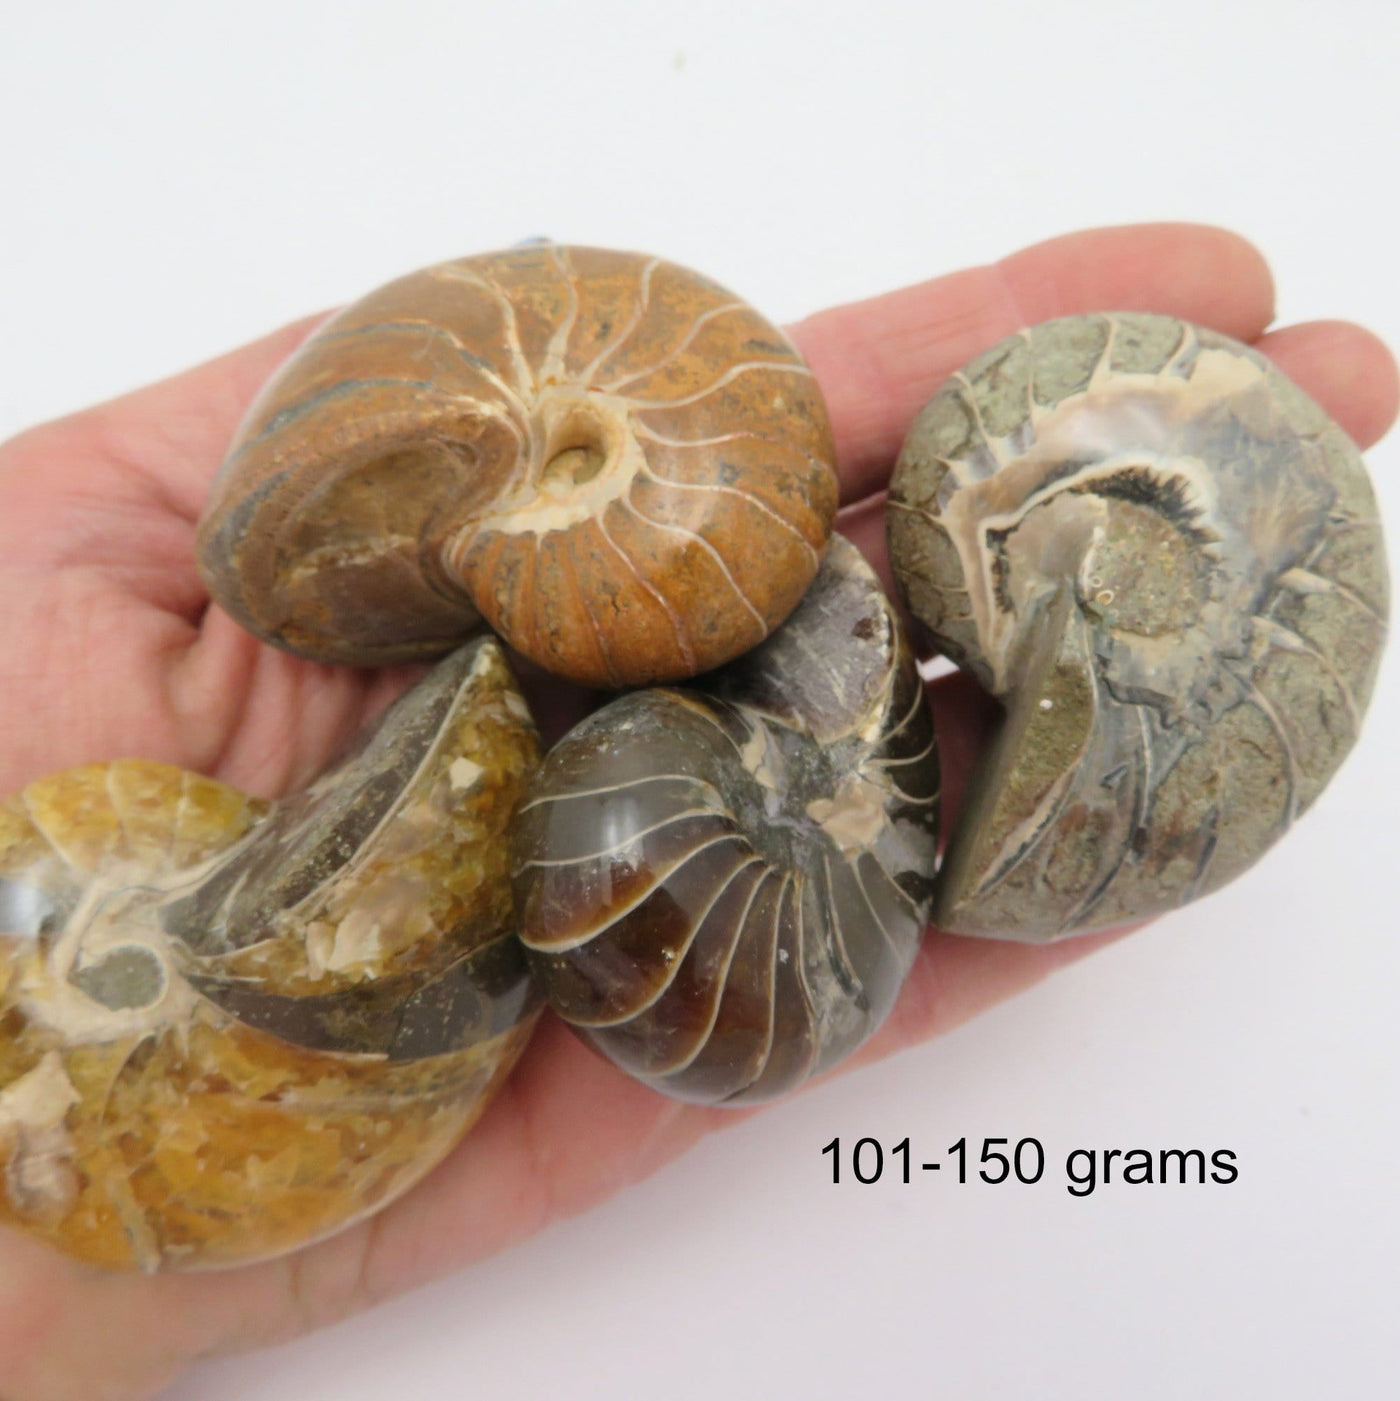 Nautilus fossil - 101-150 grams in a hand